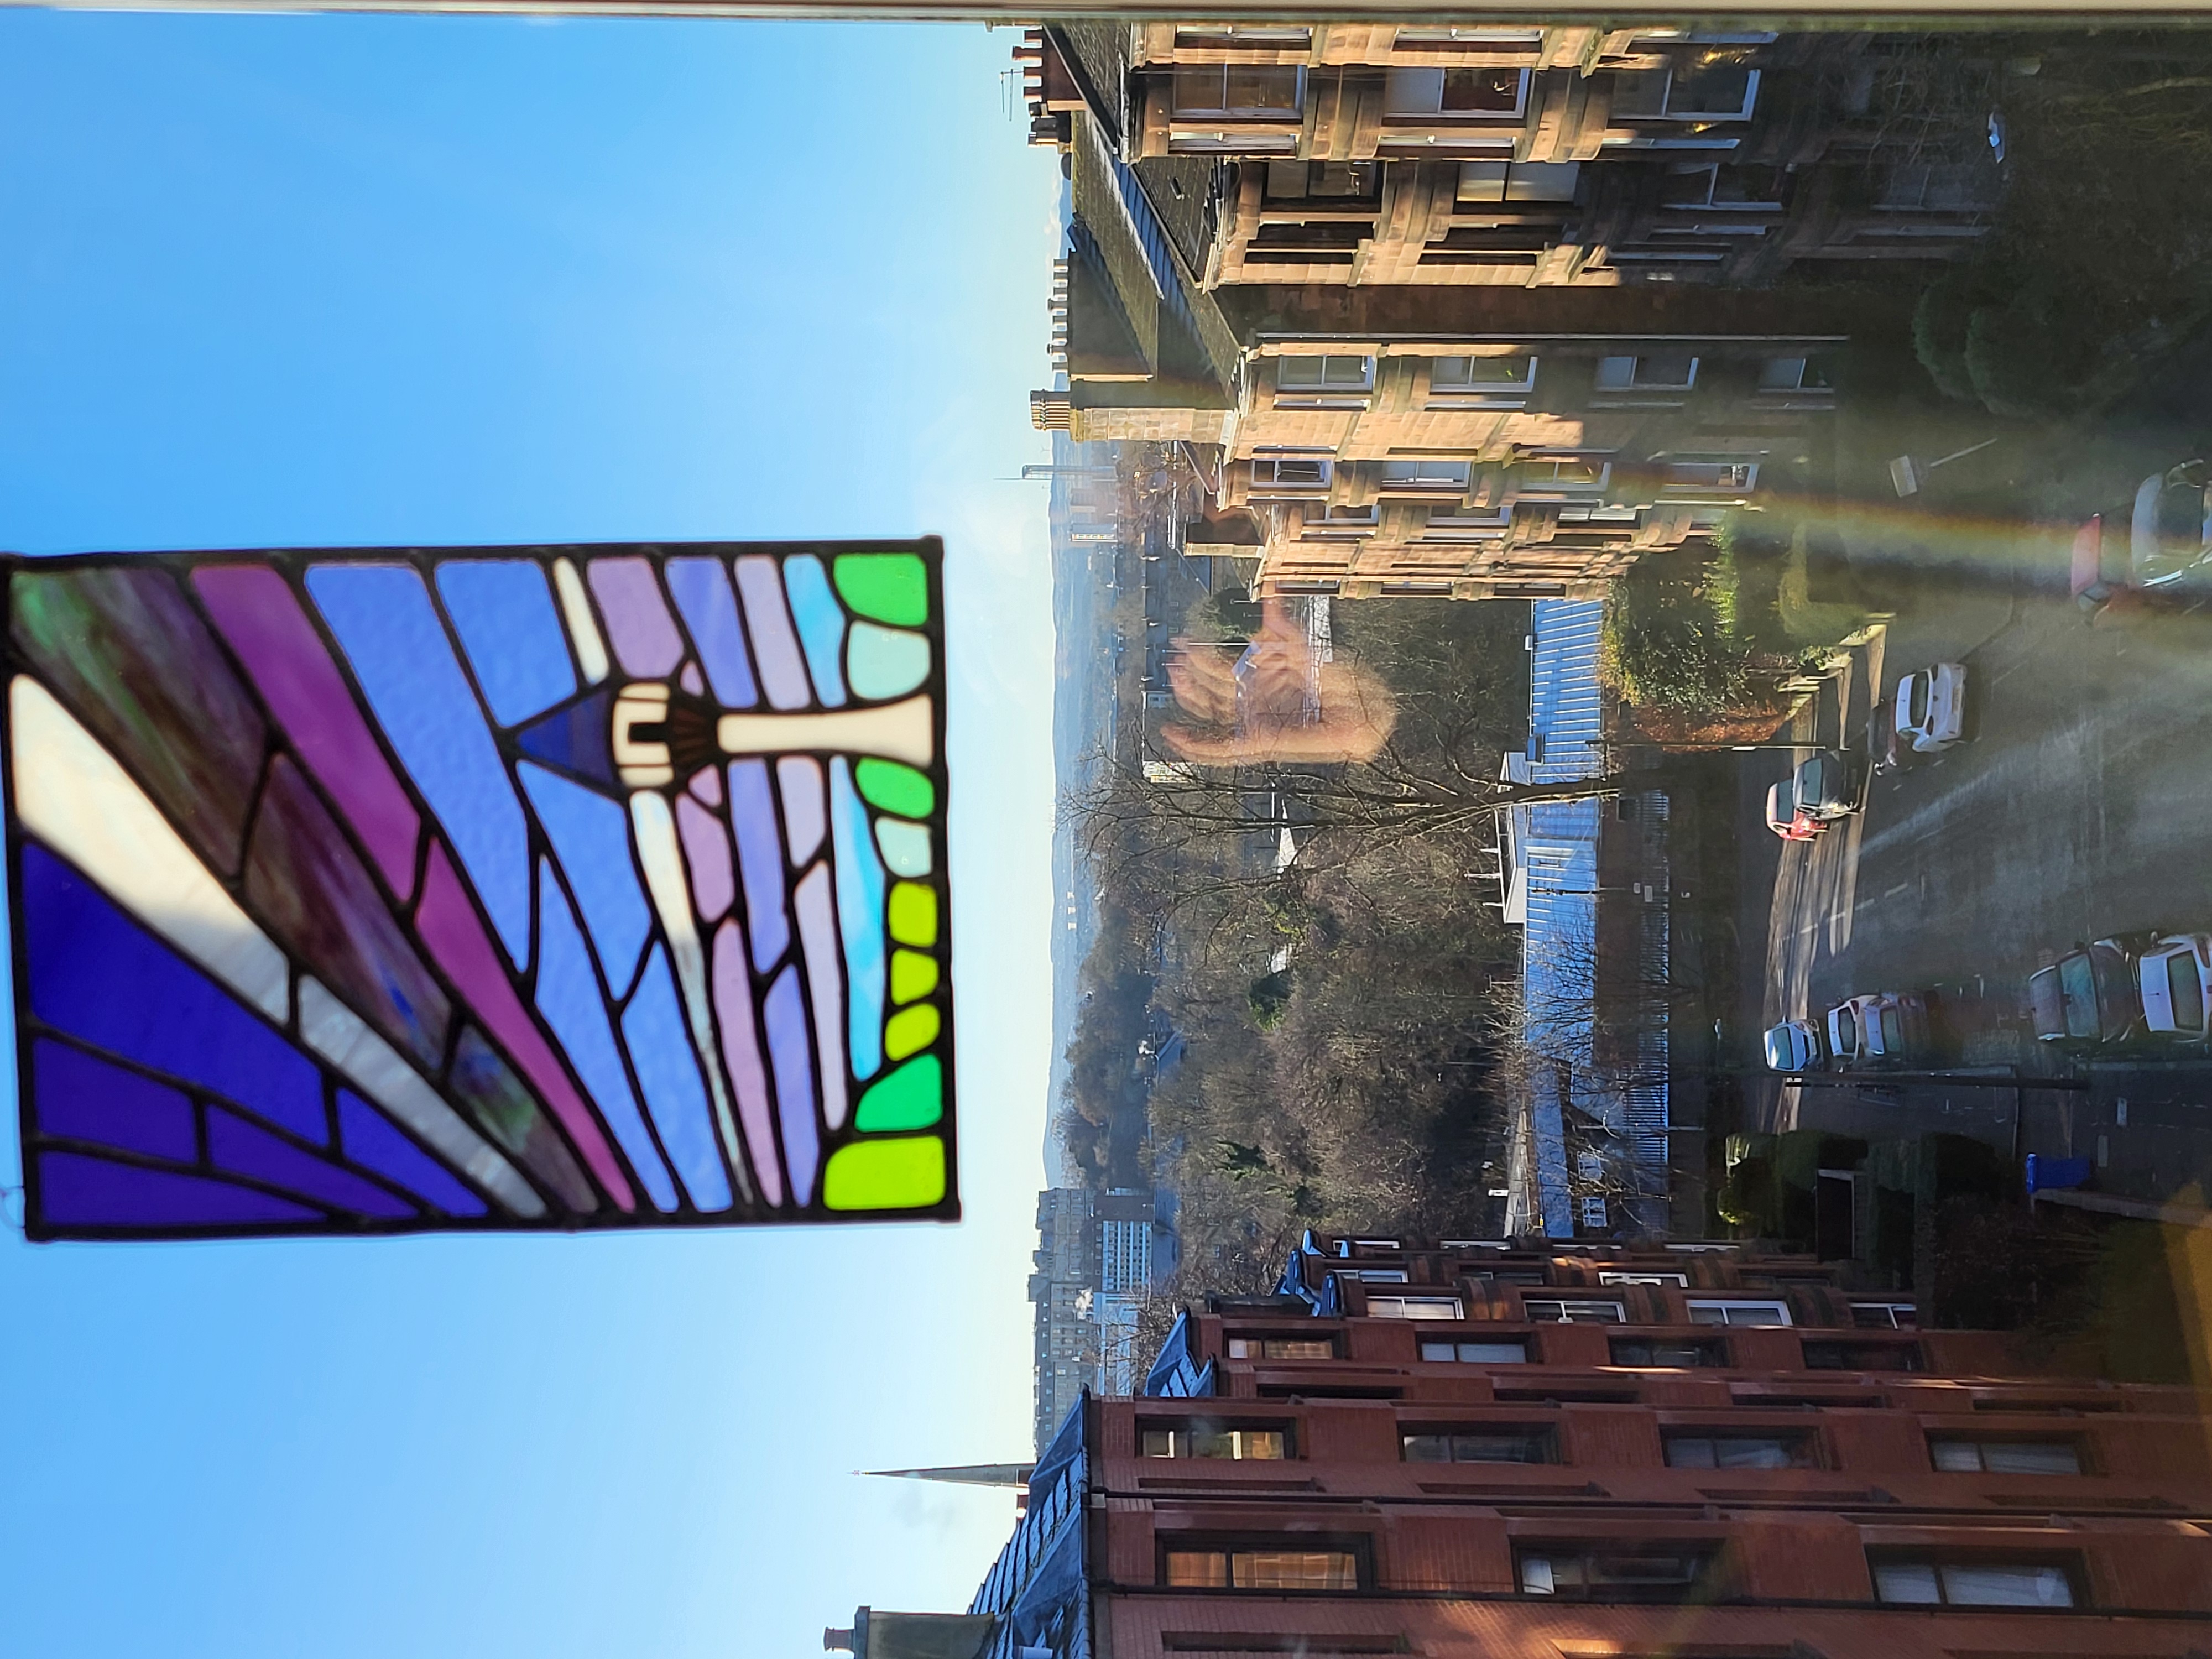 View looking into a street with red stone tenements and park at the end. A colourful stained glass window ornament at the top of the window